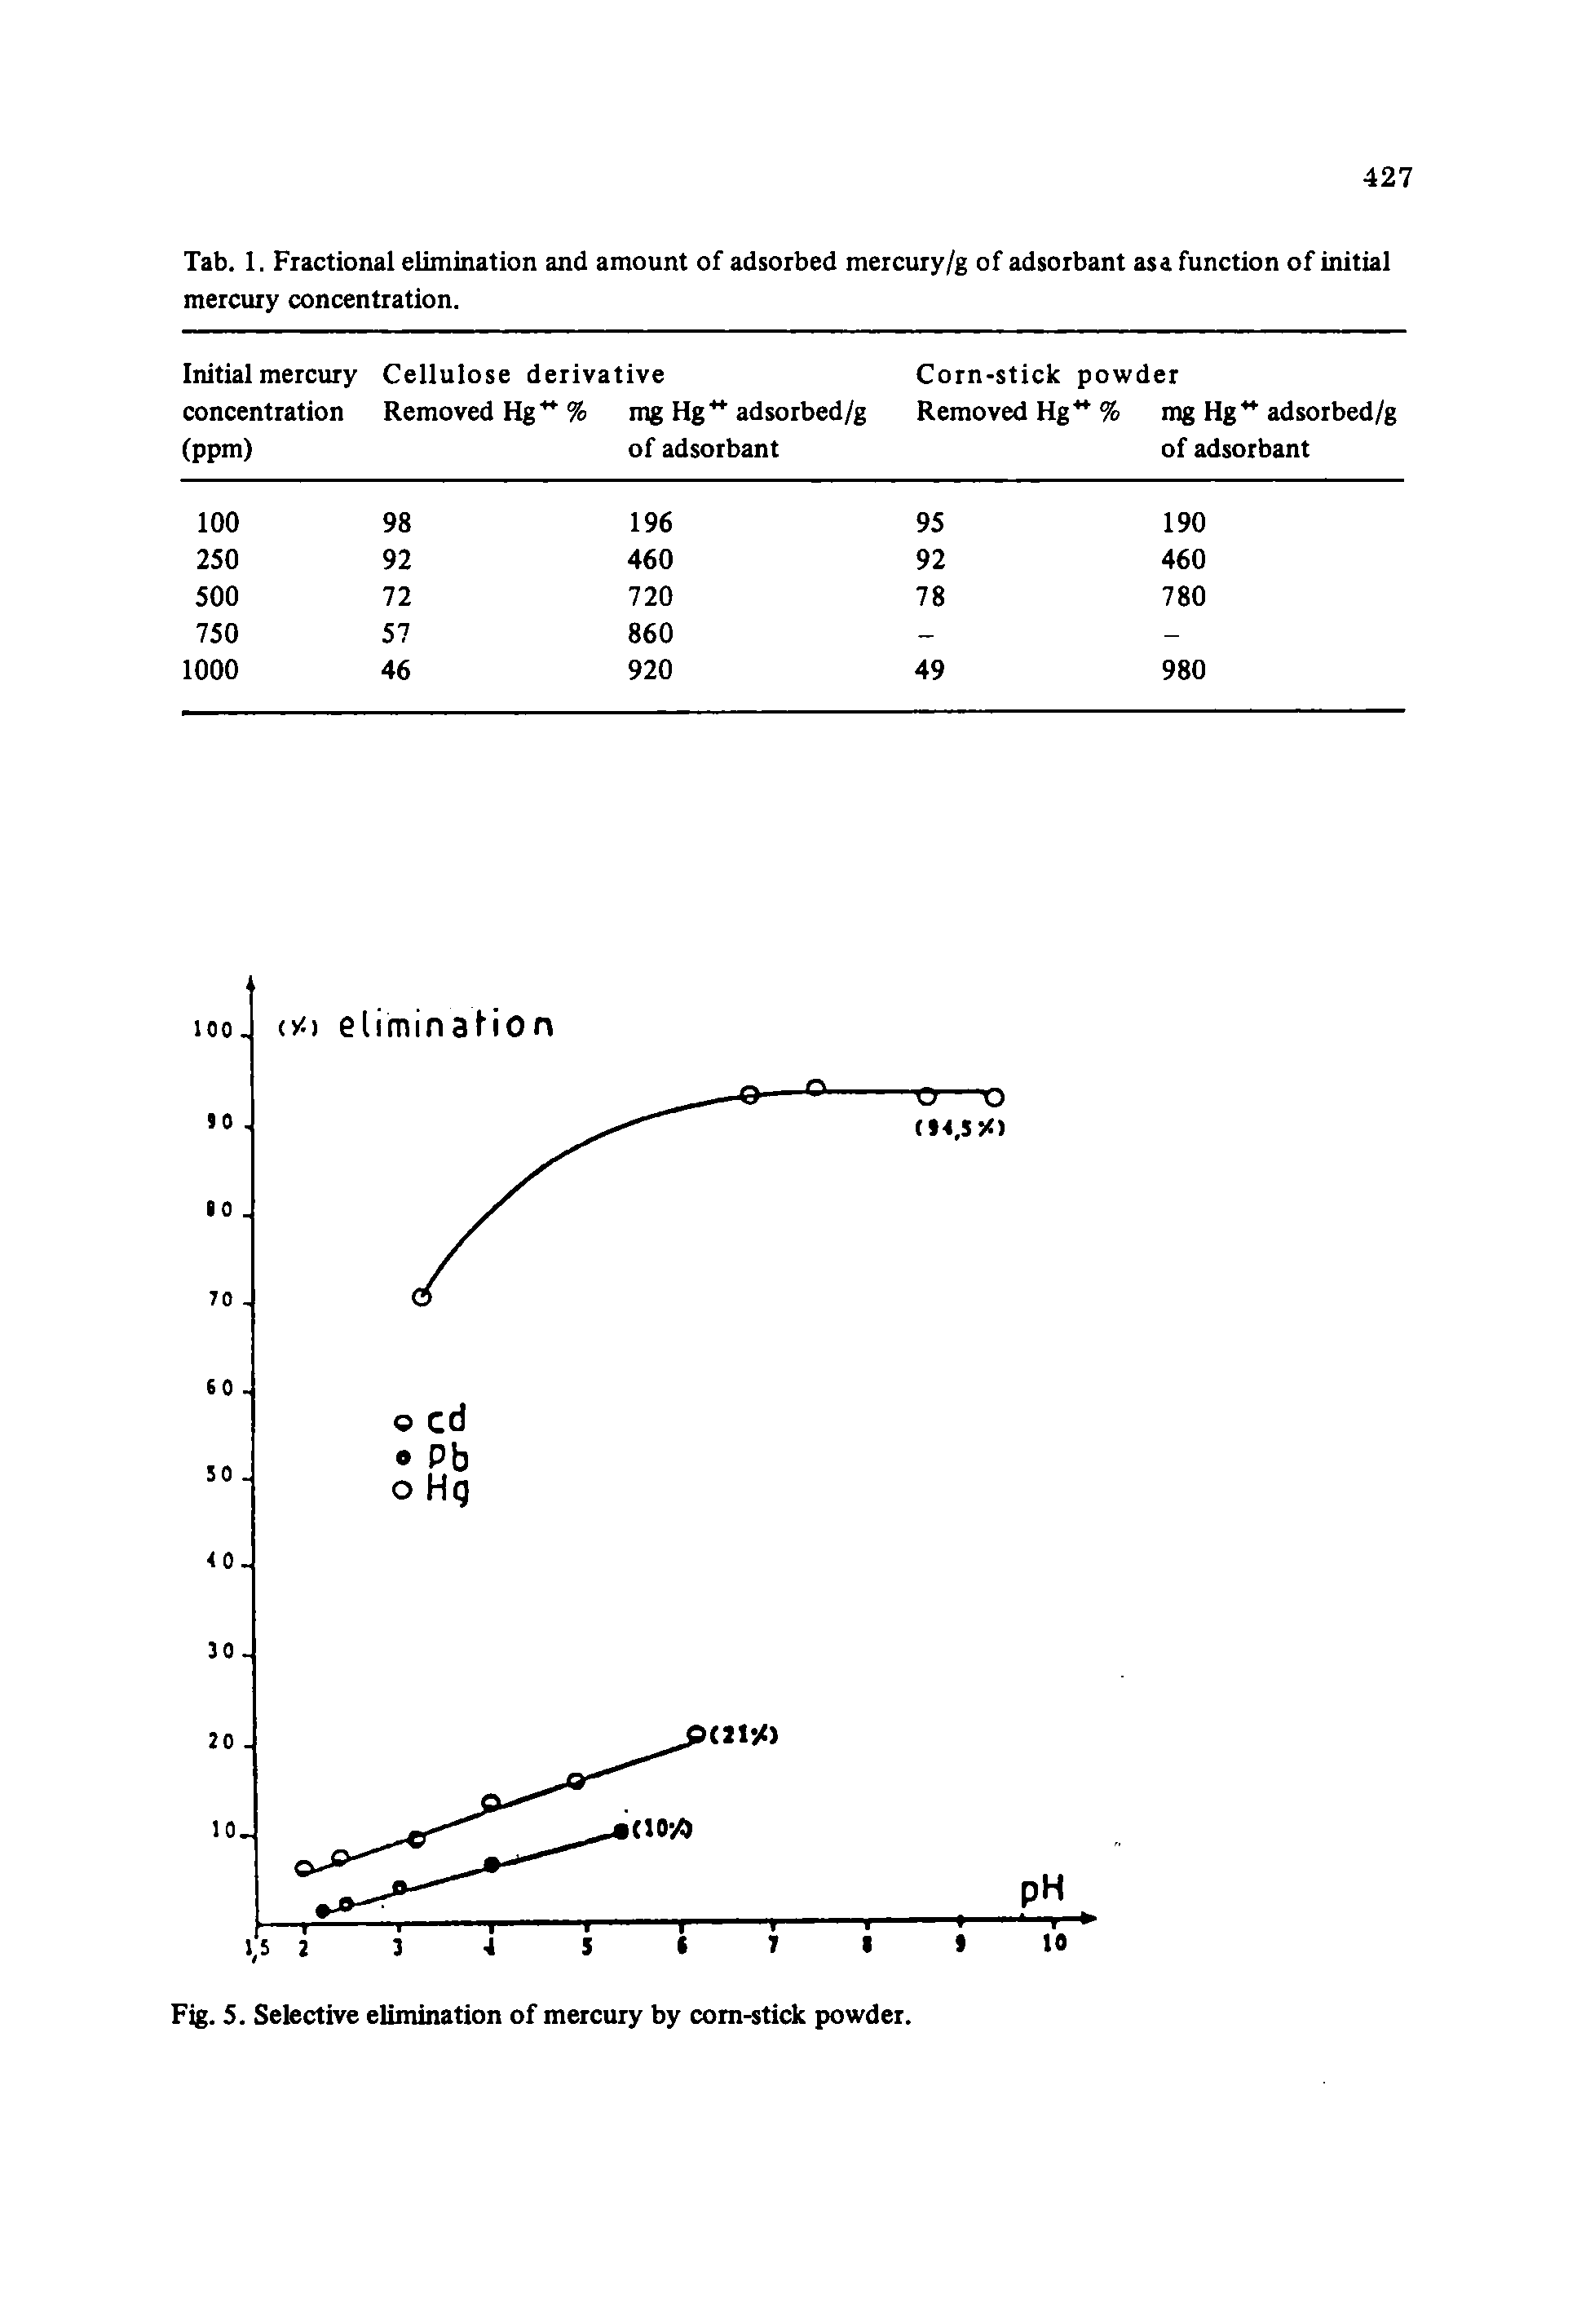 Tab. 1. Fractional elimination and amount of adsorbed mercury/g of adsorbant asa function of initial mercury concentration.